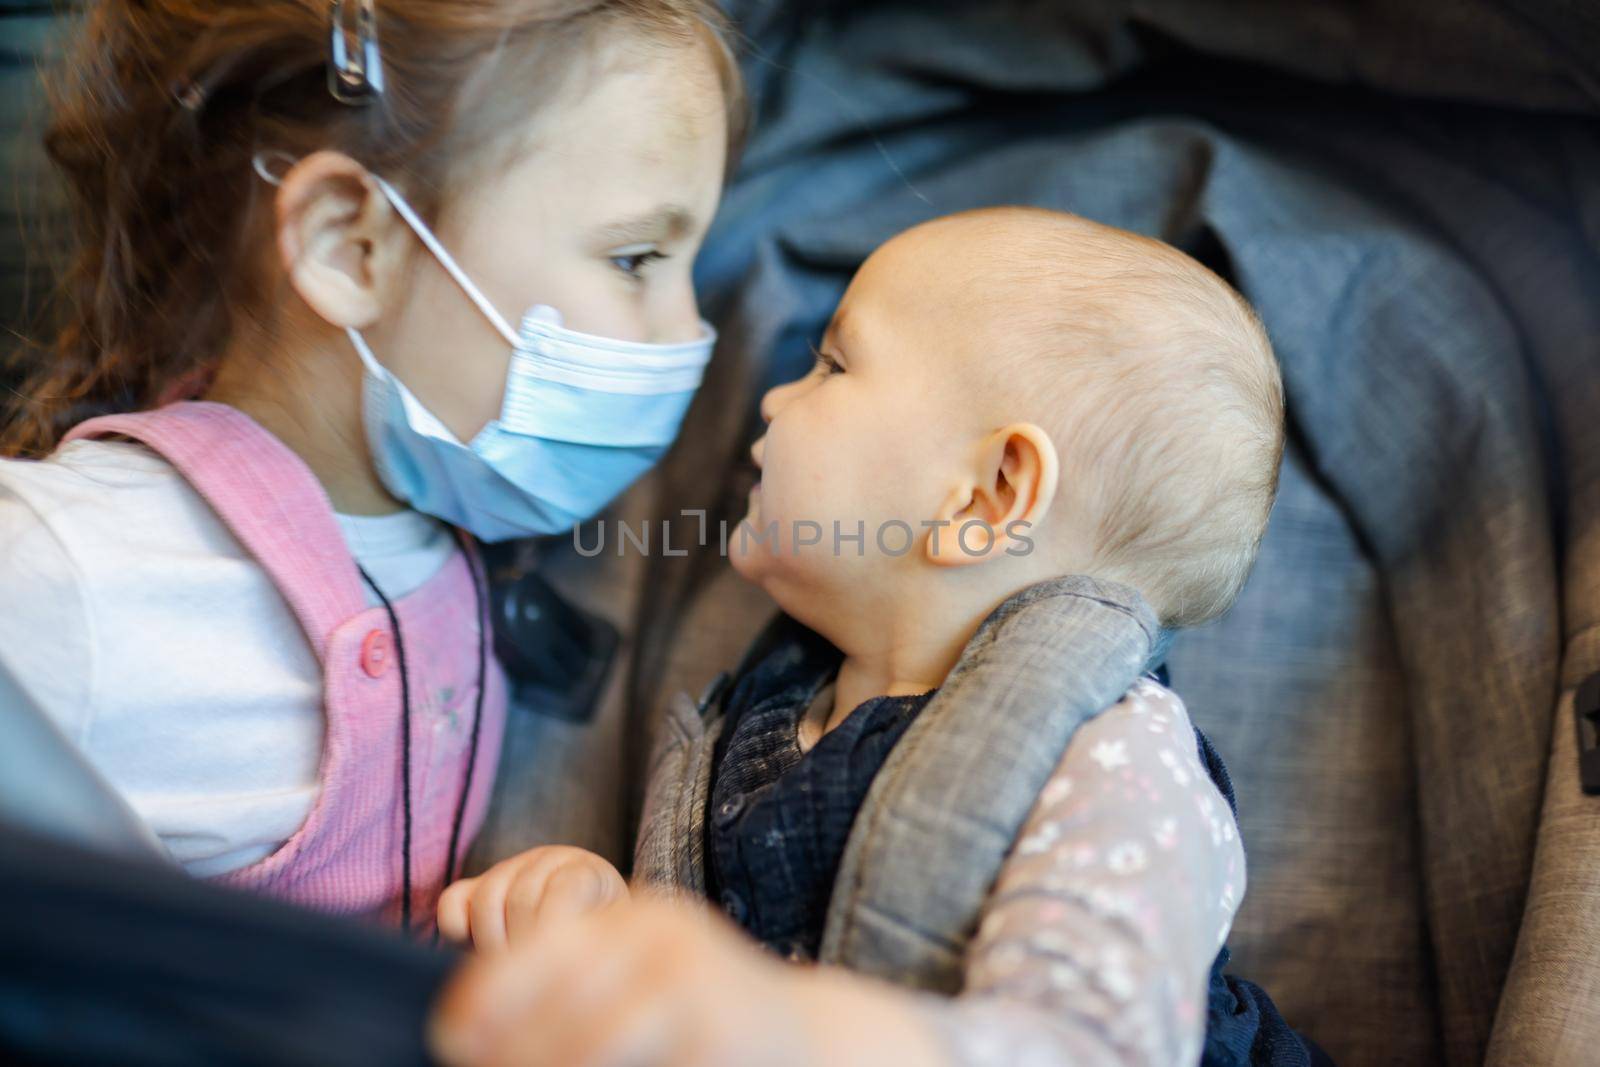 Portrait of adorable little girl wearing pink overalls and face mask next to her happy baby sister in stroller. Close-up of cute young children with blurry background. New normal after Covid-19